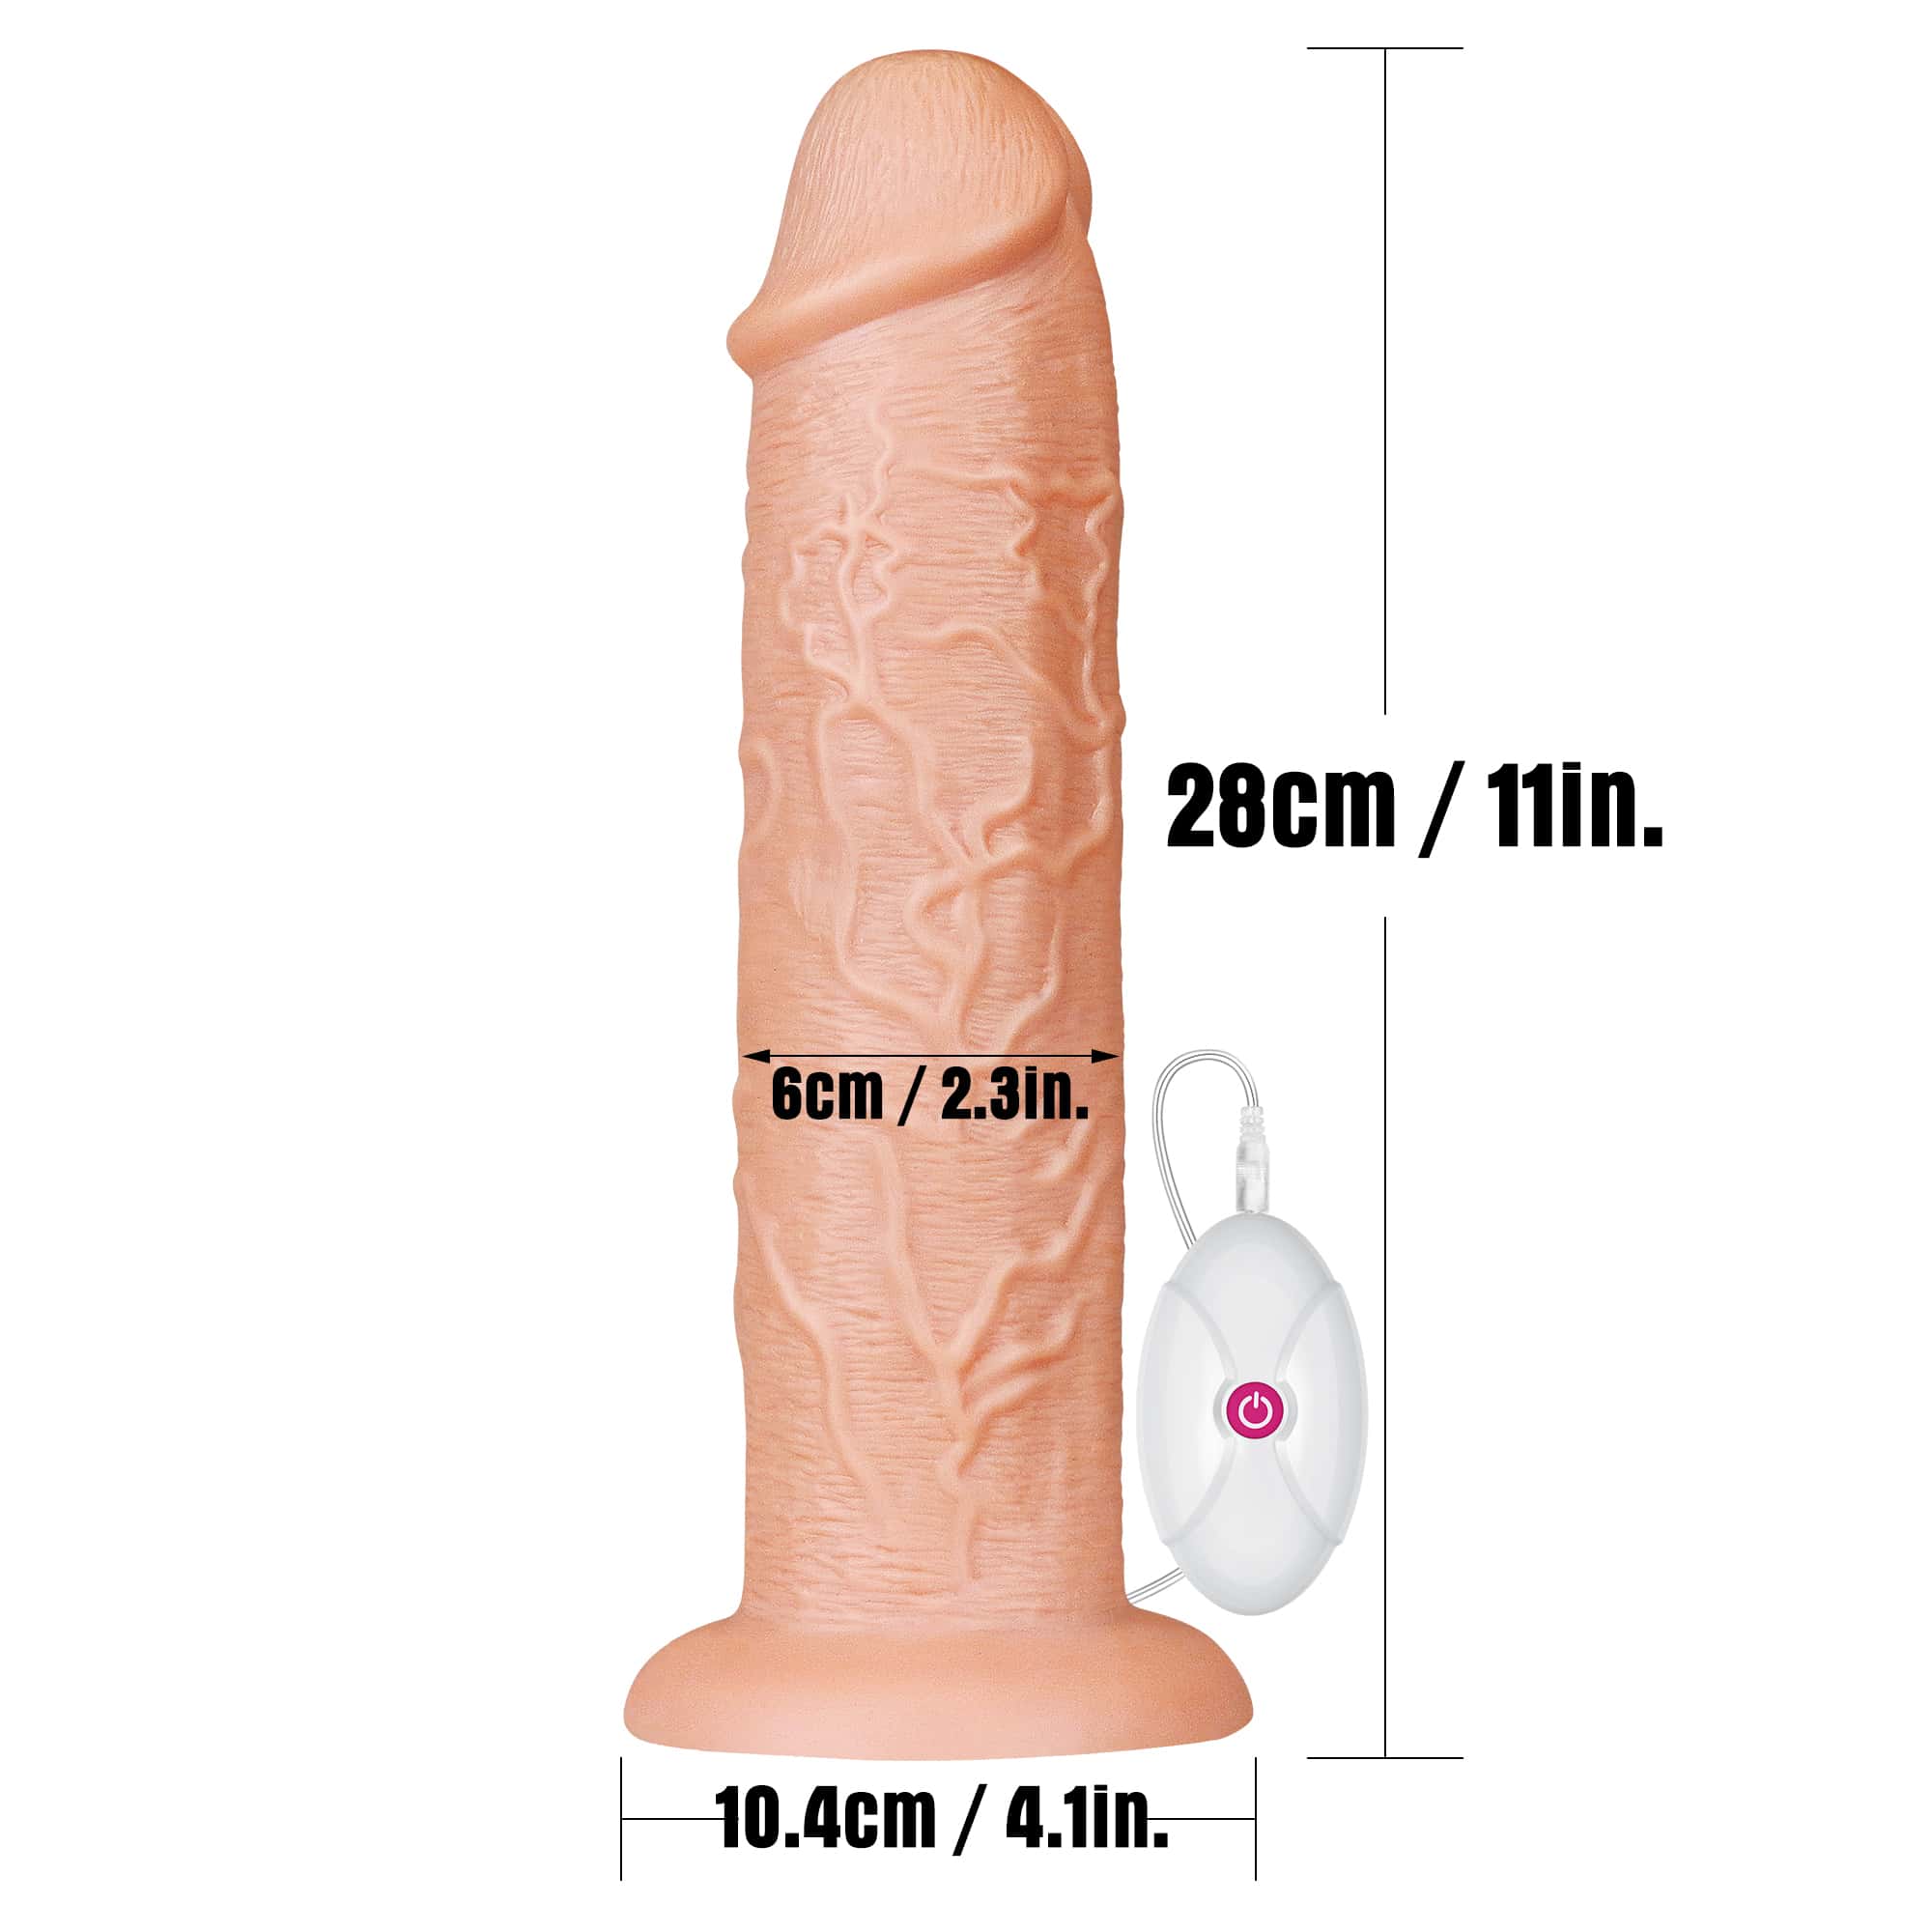 The size of the 11 inches realistic long vibrating anal dildo